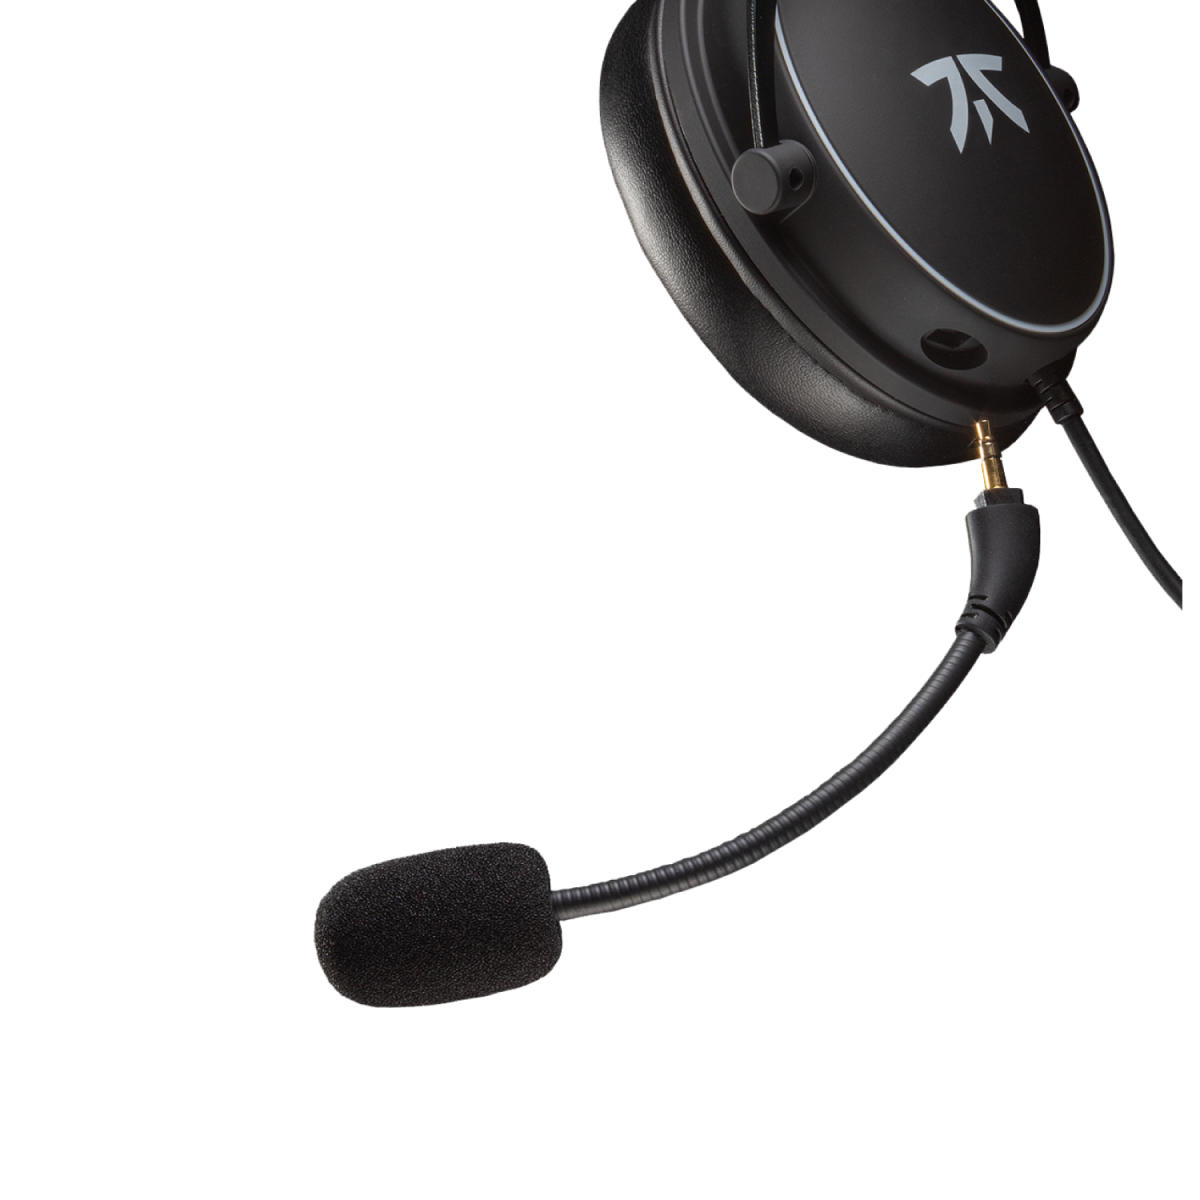 Fnatic REACT review: A great-sounding headset all gamers can enjoy